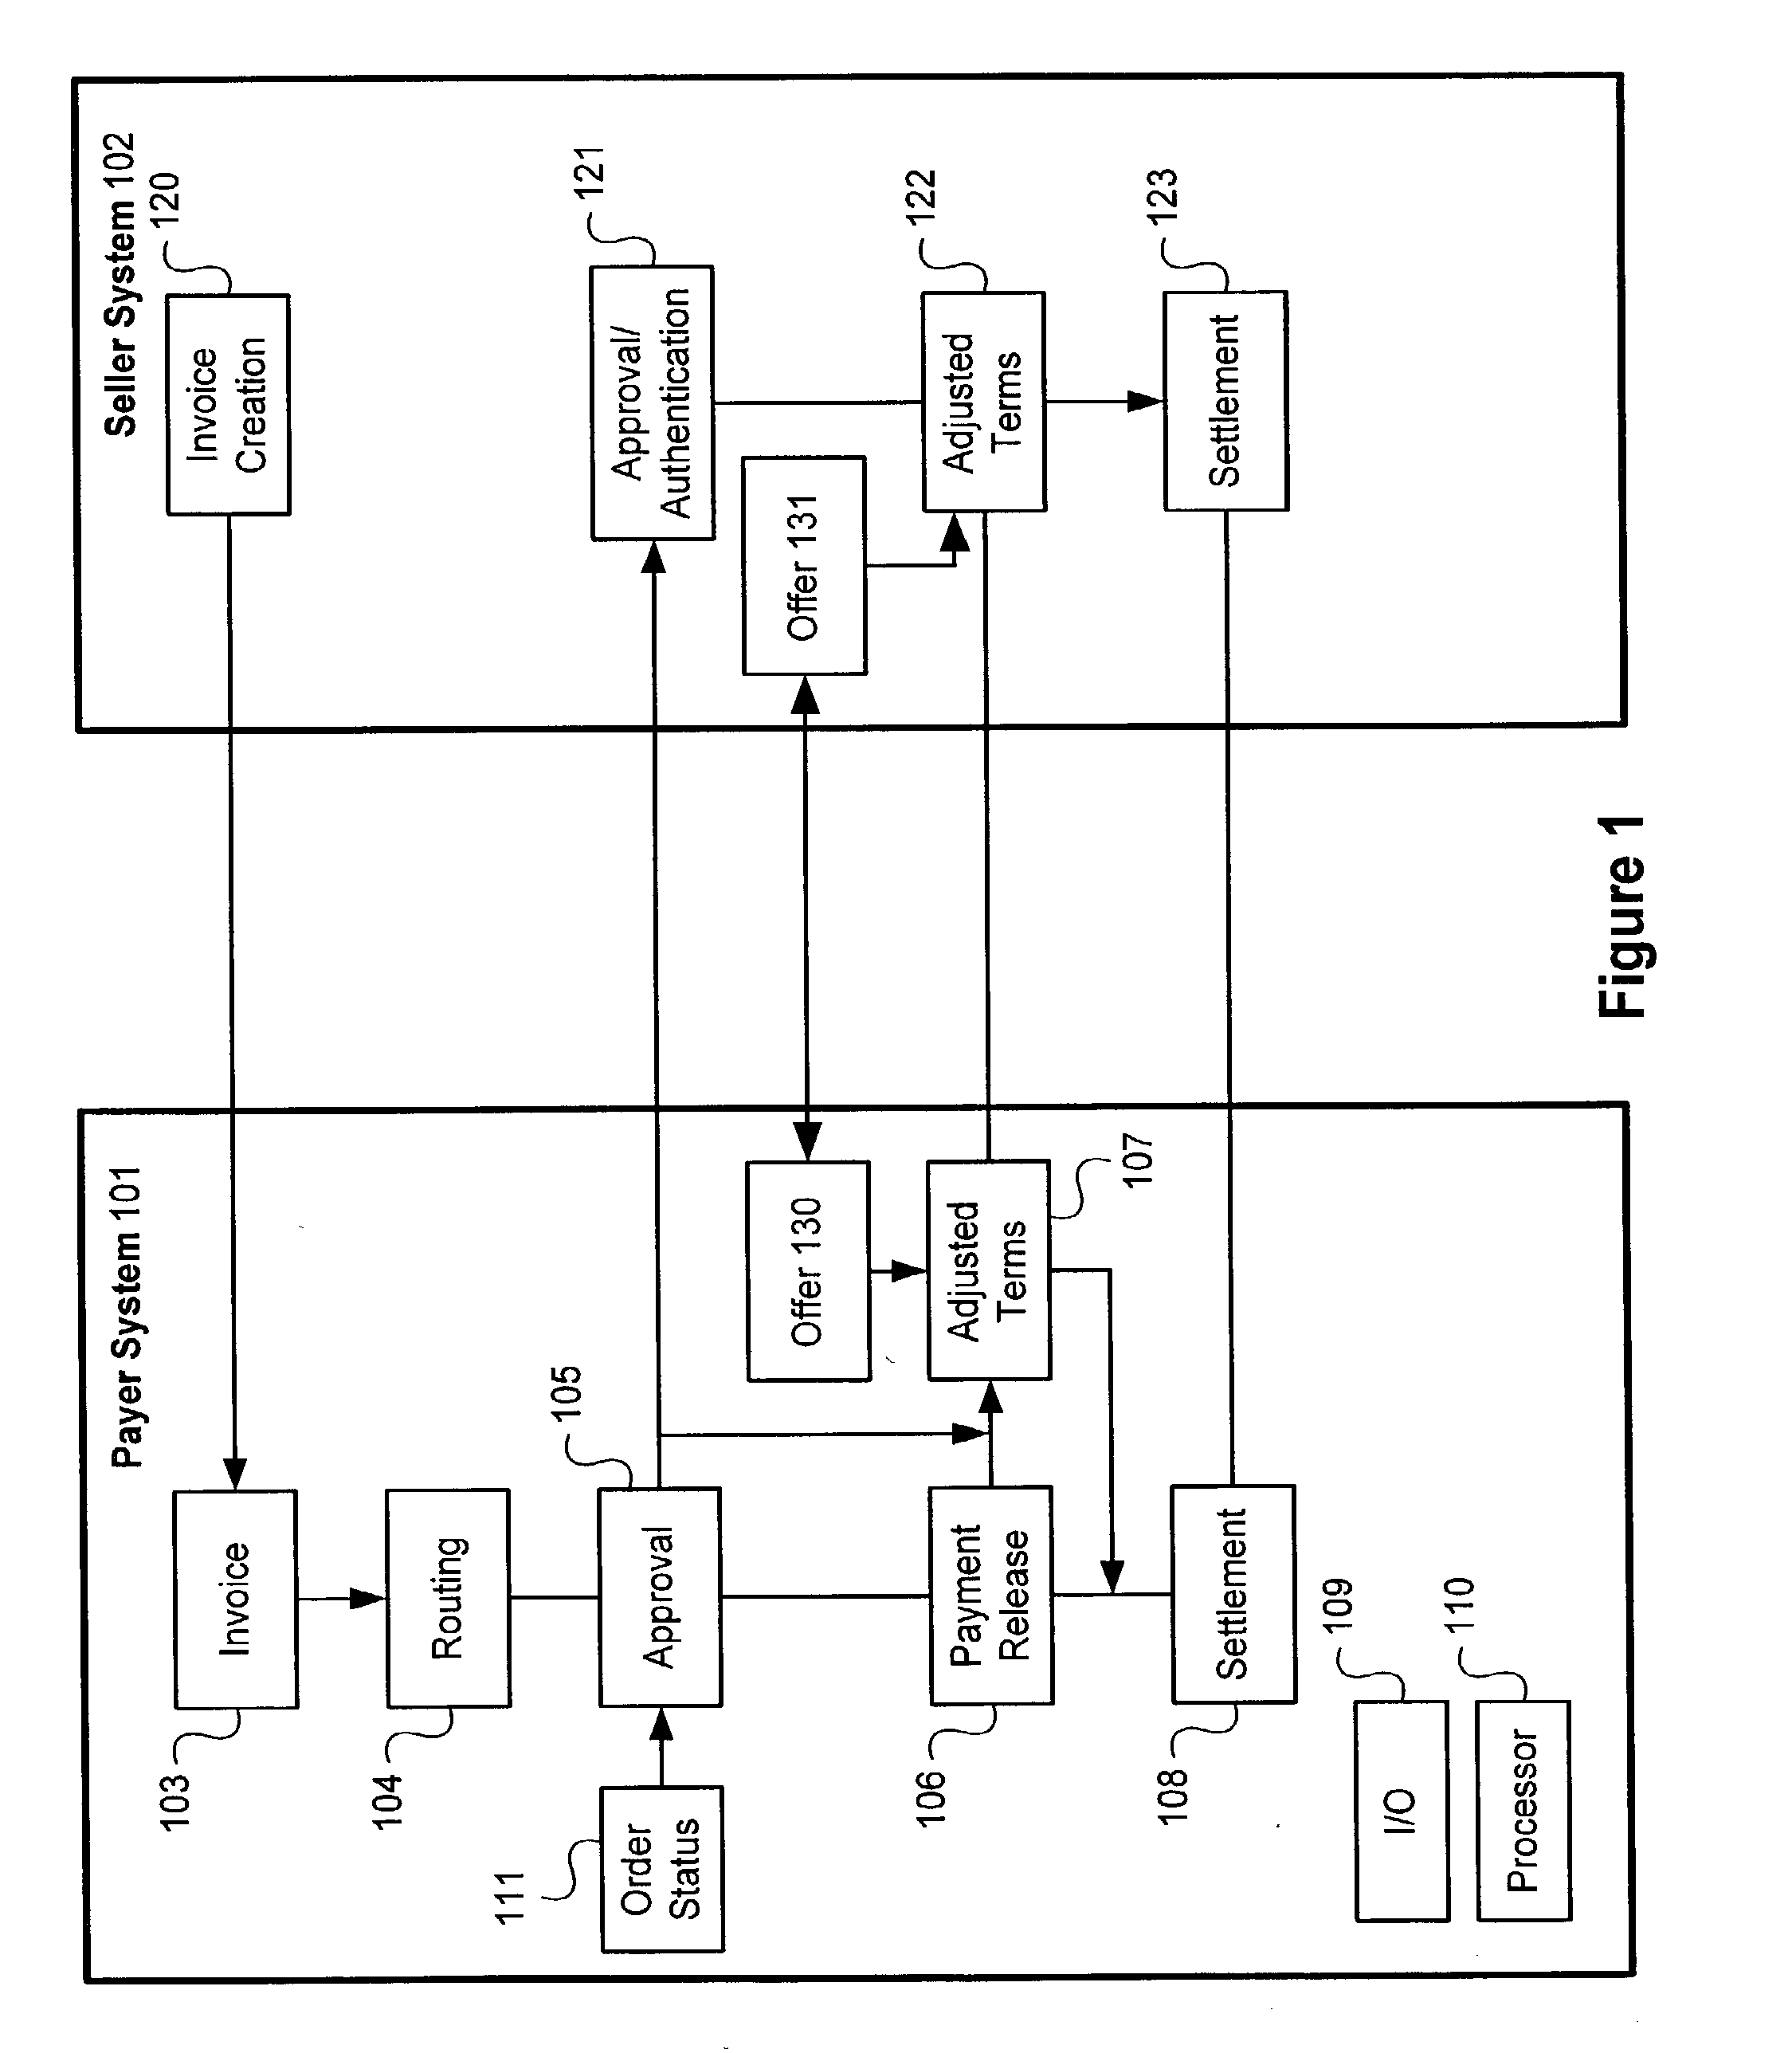 System and Method for Varying Electronic Settlements Between Buyers and Suppliers with Dynamic Discount Terms